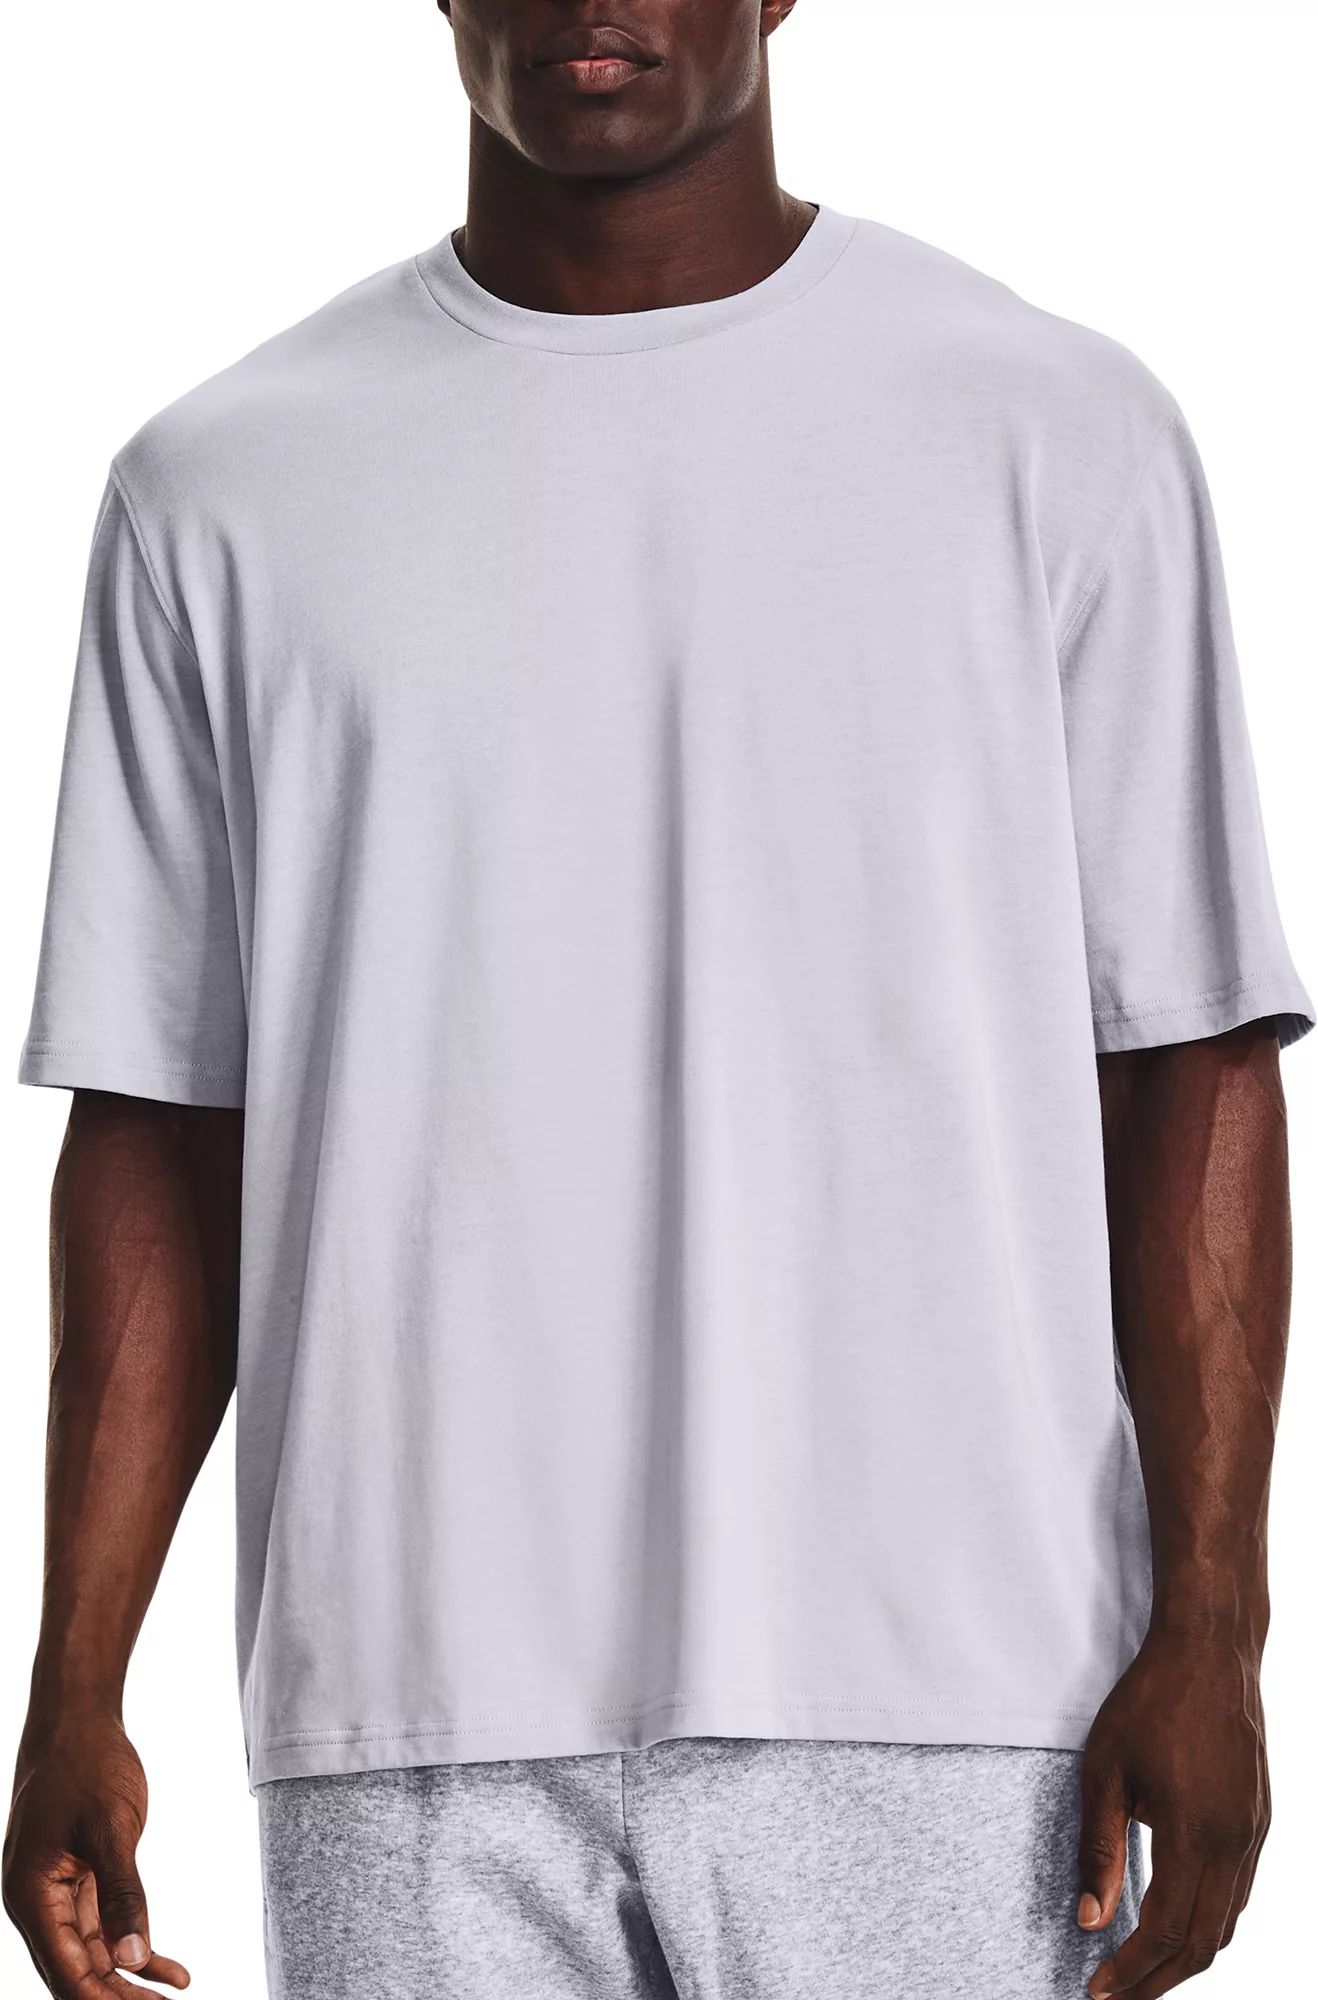 Under Armour Men's Playback Boxy Short Sleeve T-Shirt, Small, Mod Gray/White | Dick's Sporting Goods